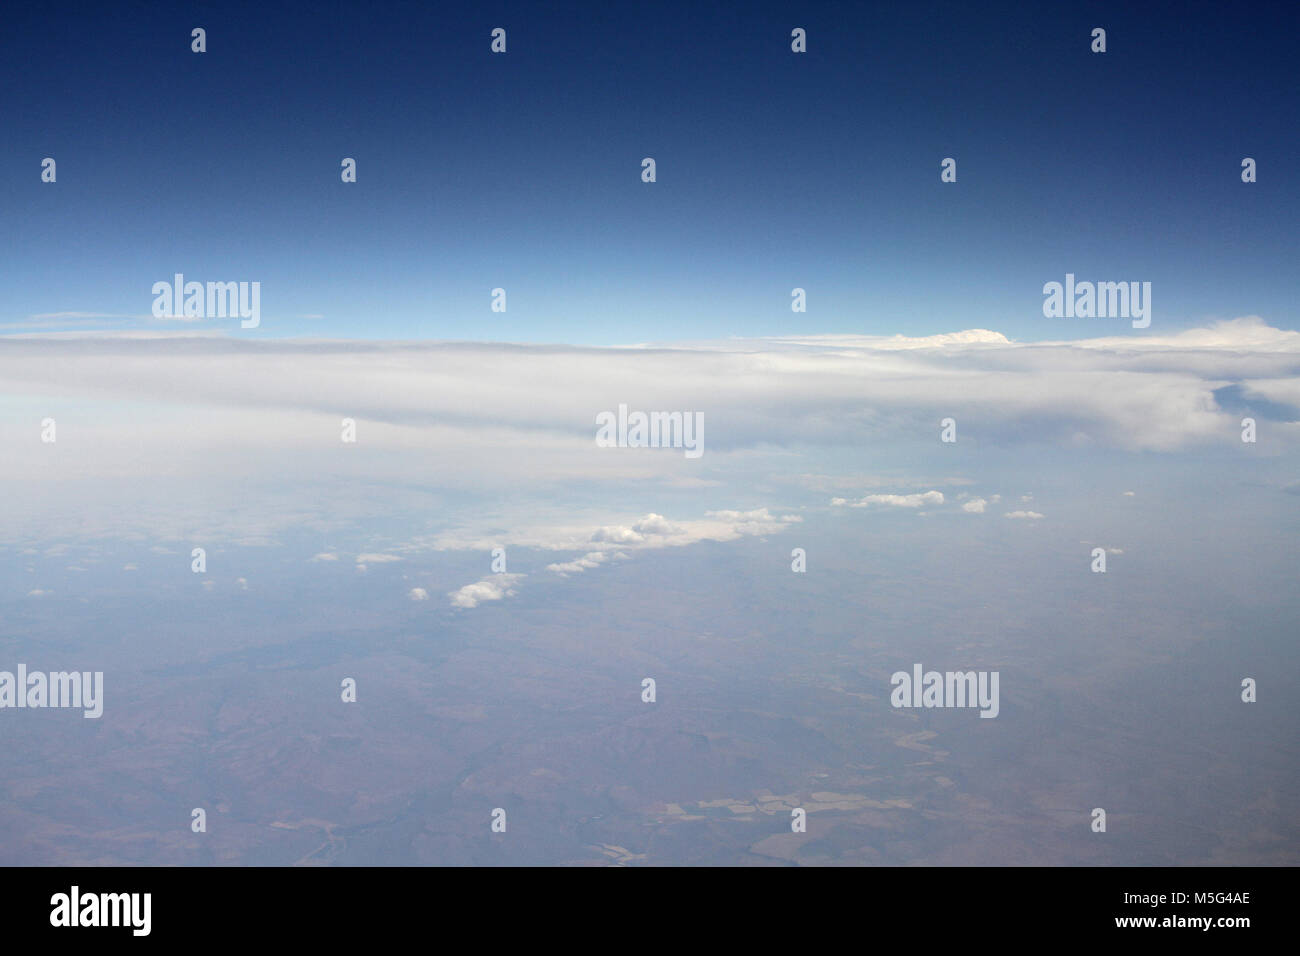 View of clouds from a airplane, Africa Stock Photo